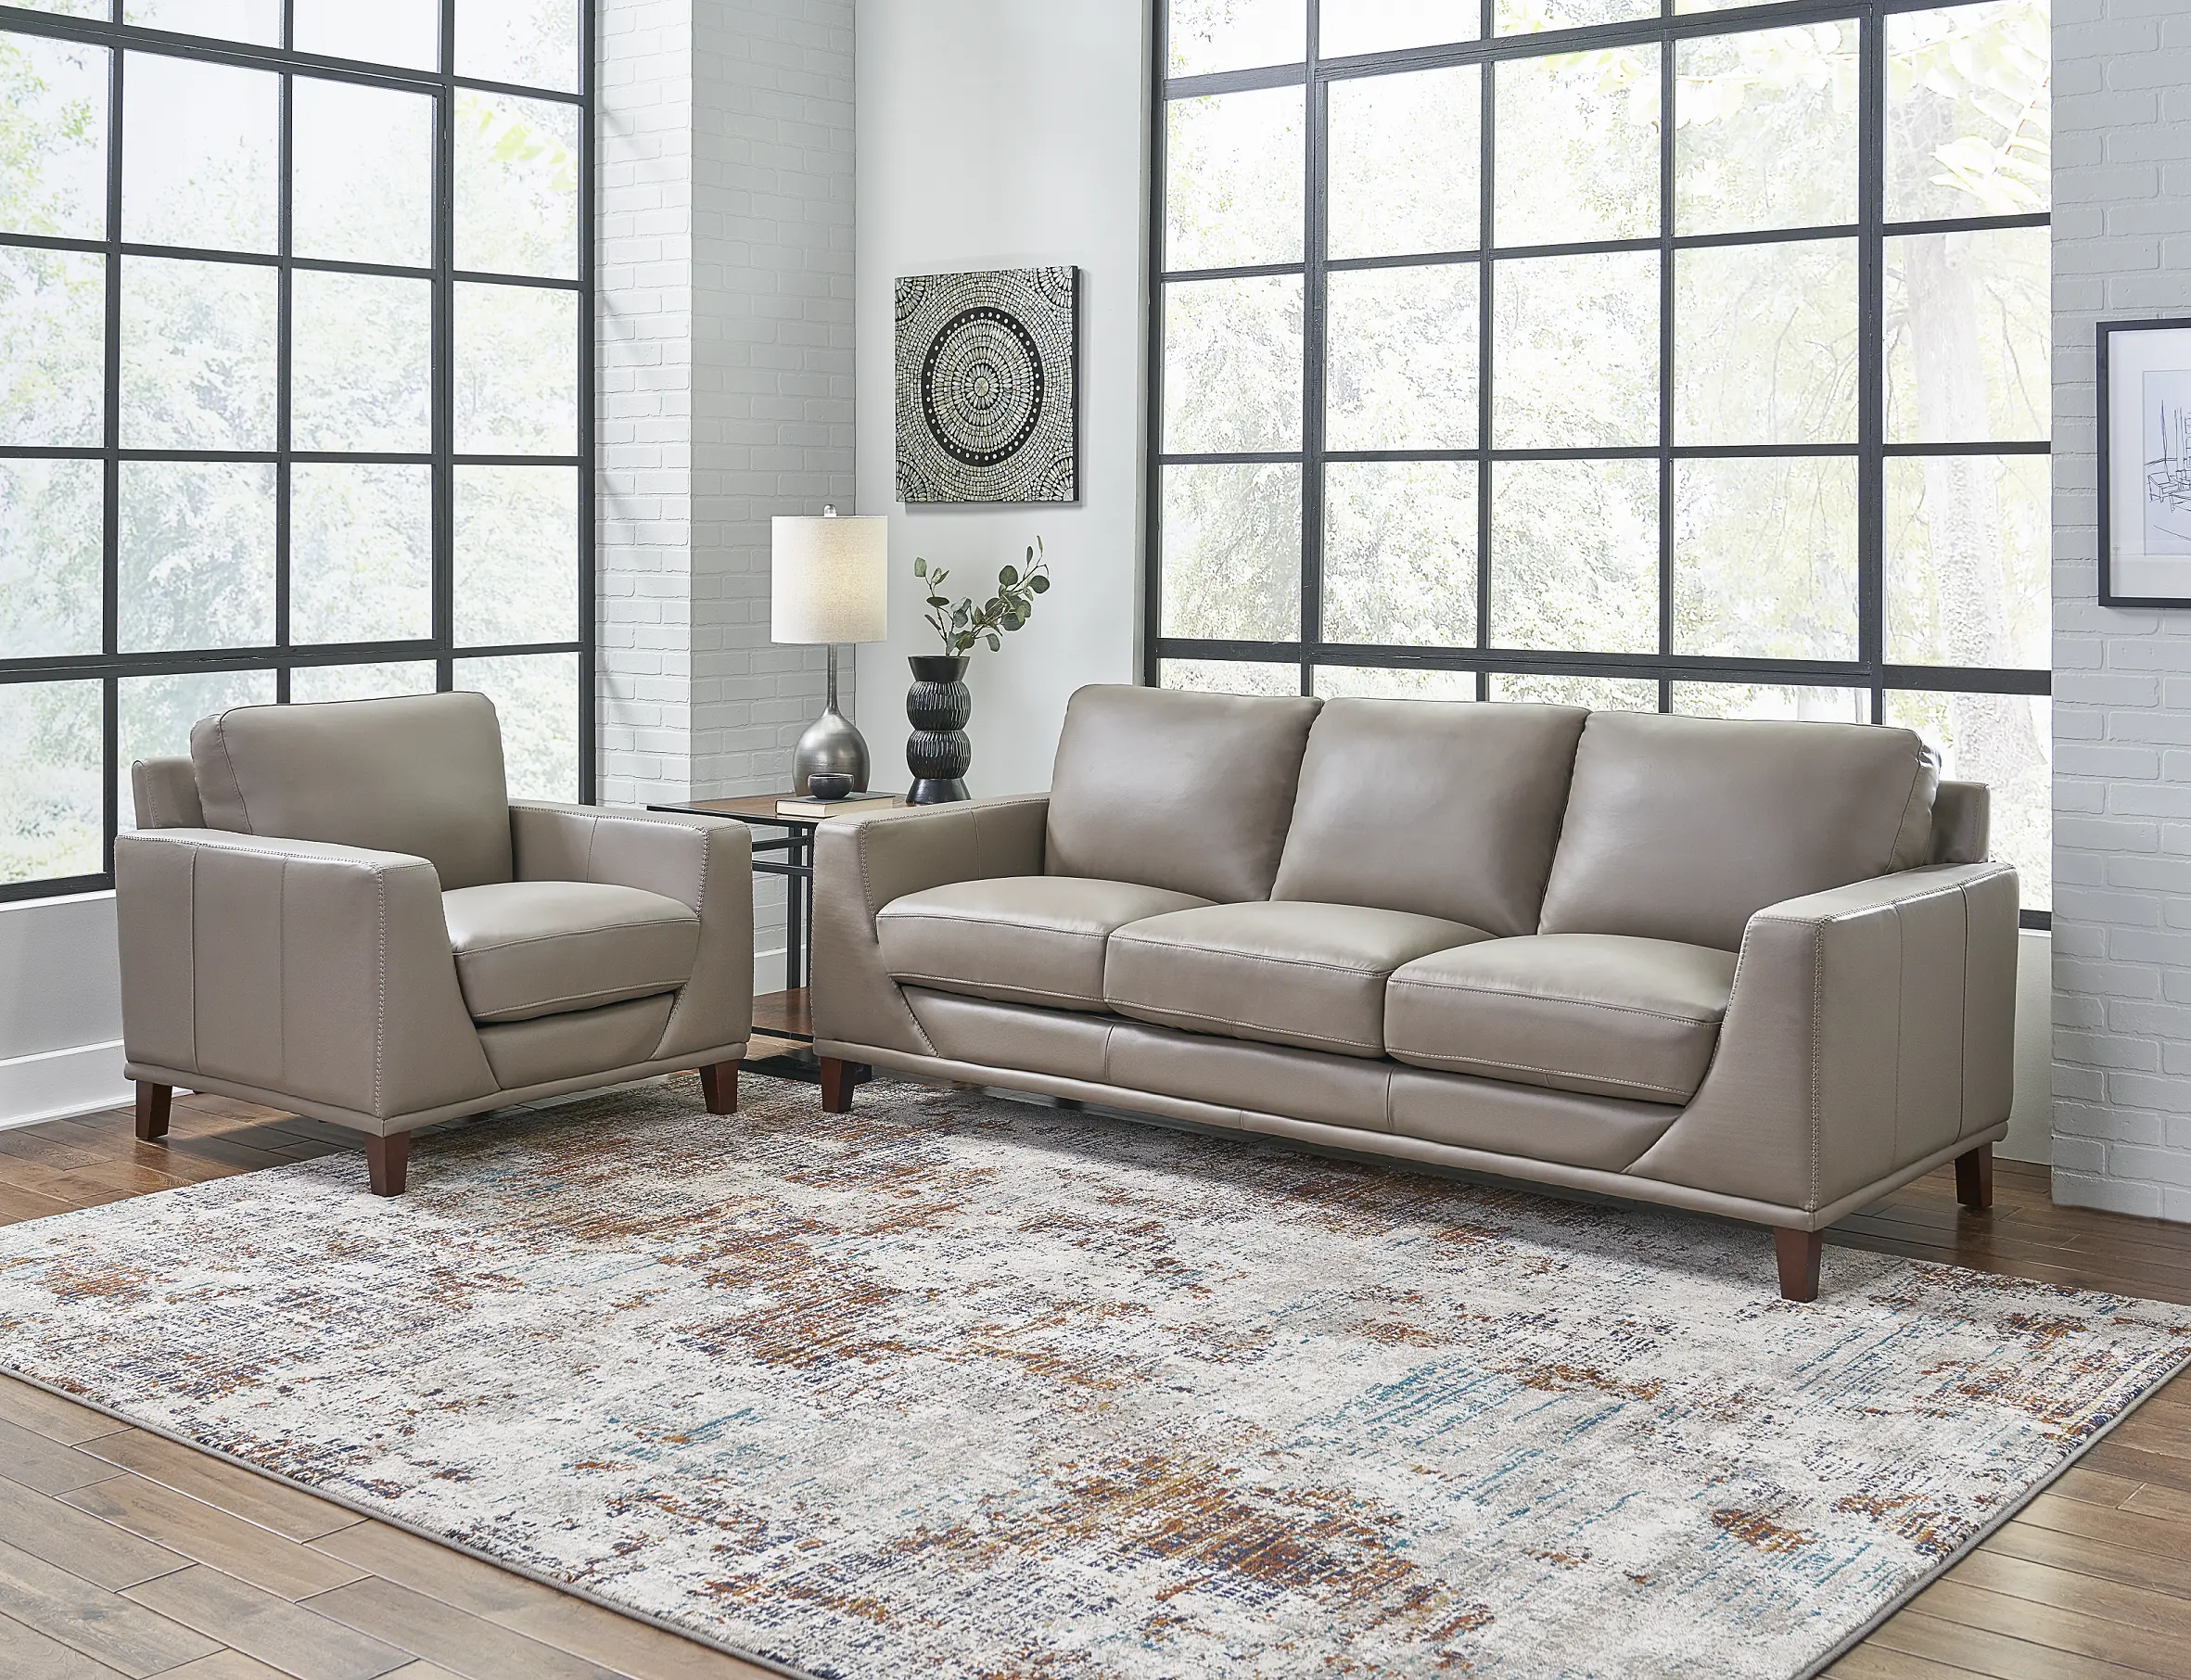 Sonoma Taupe Leather 2 Piece Sofa and Chair Set - Amax Leather